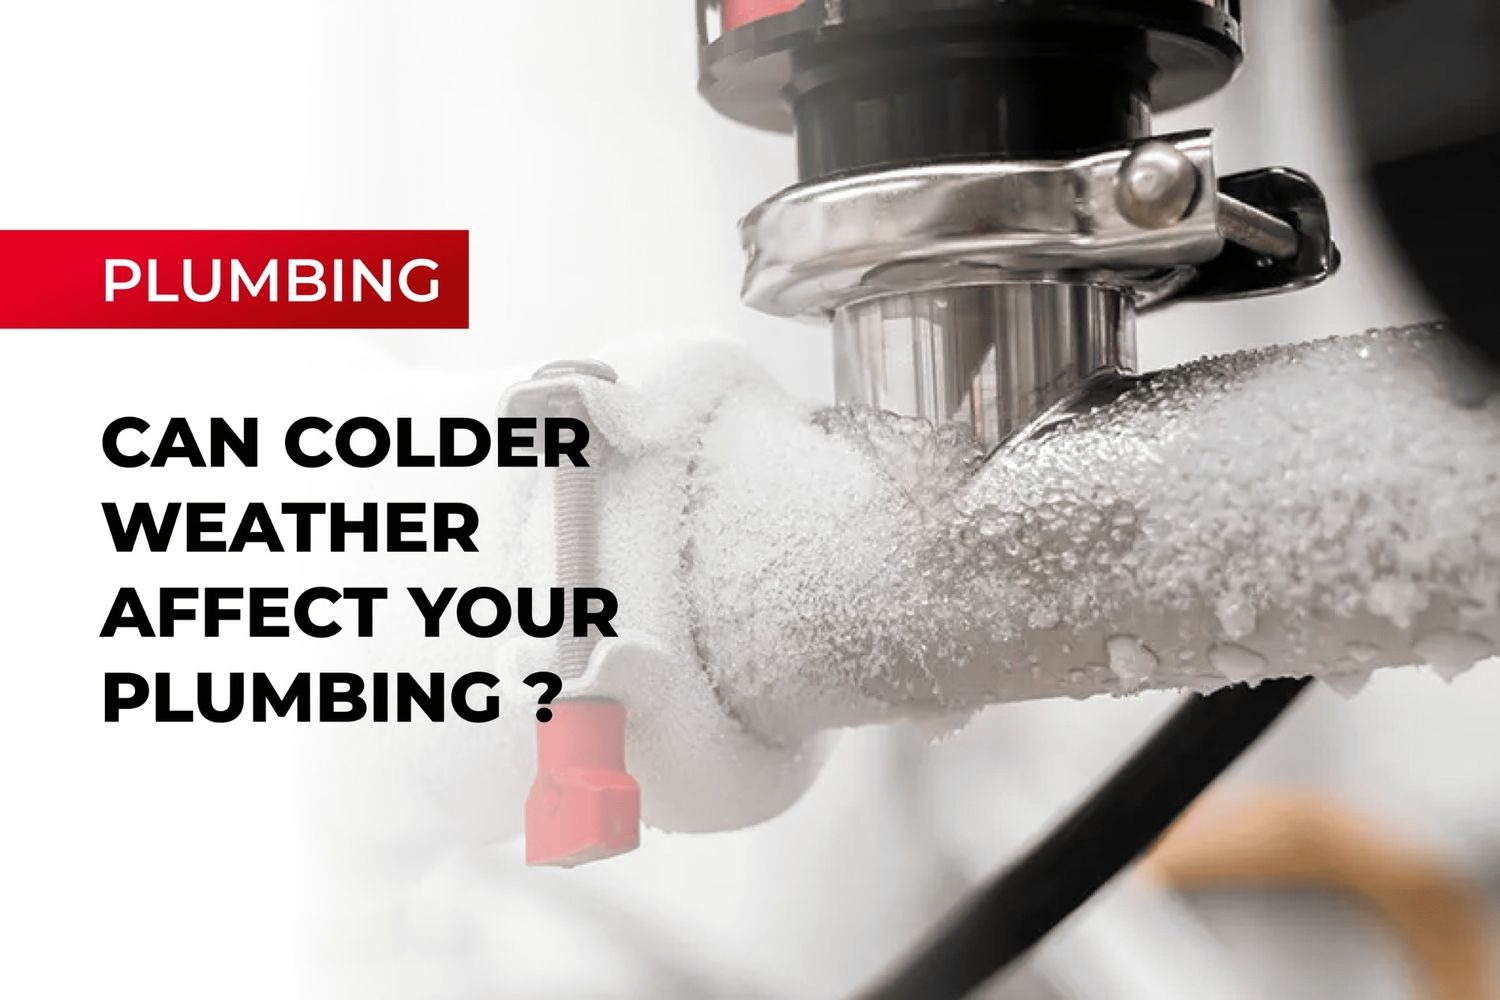 Can Colder Weather Affect Your Plumbing?